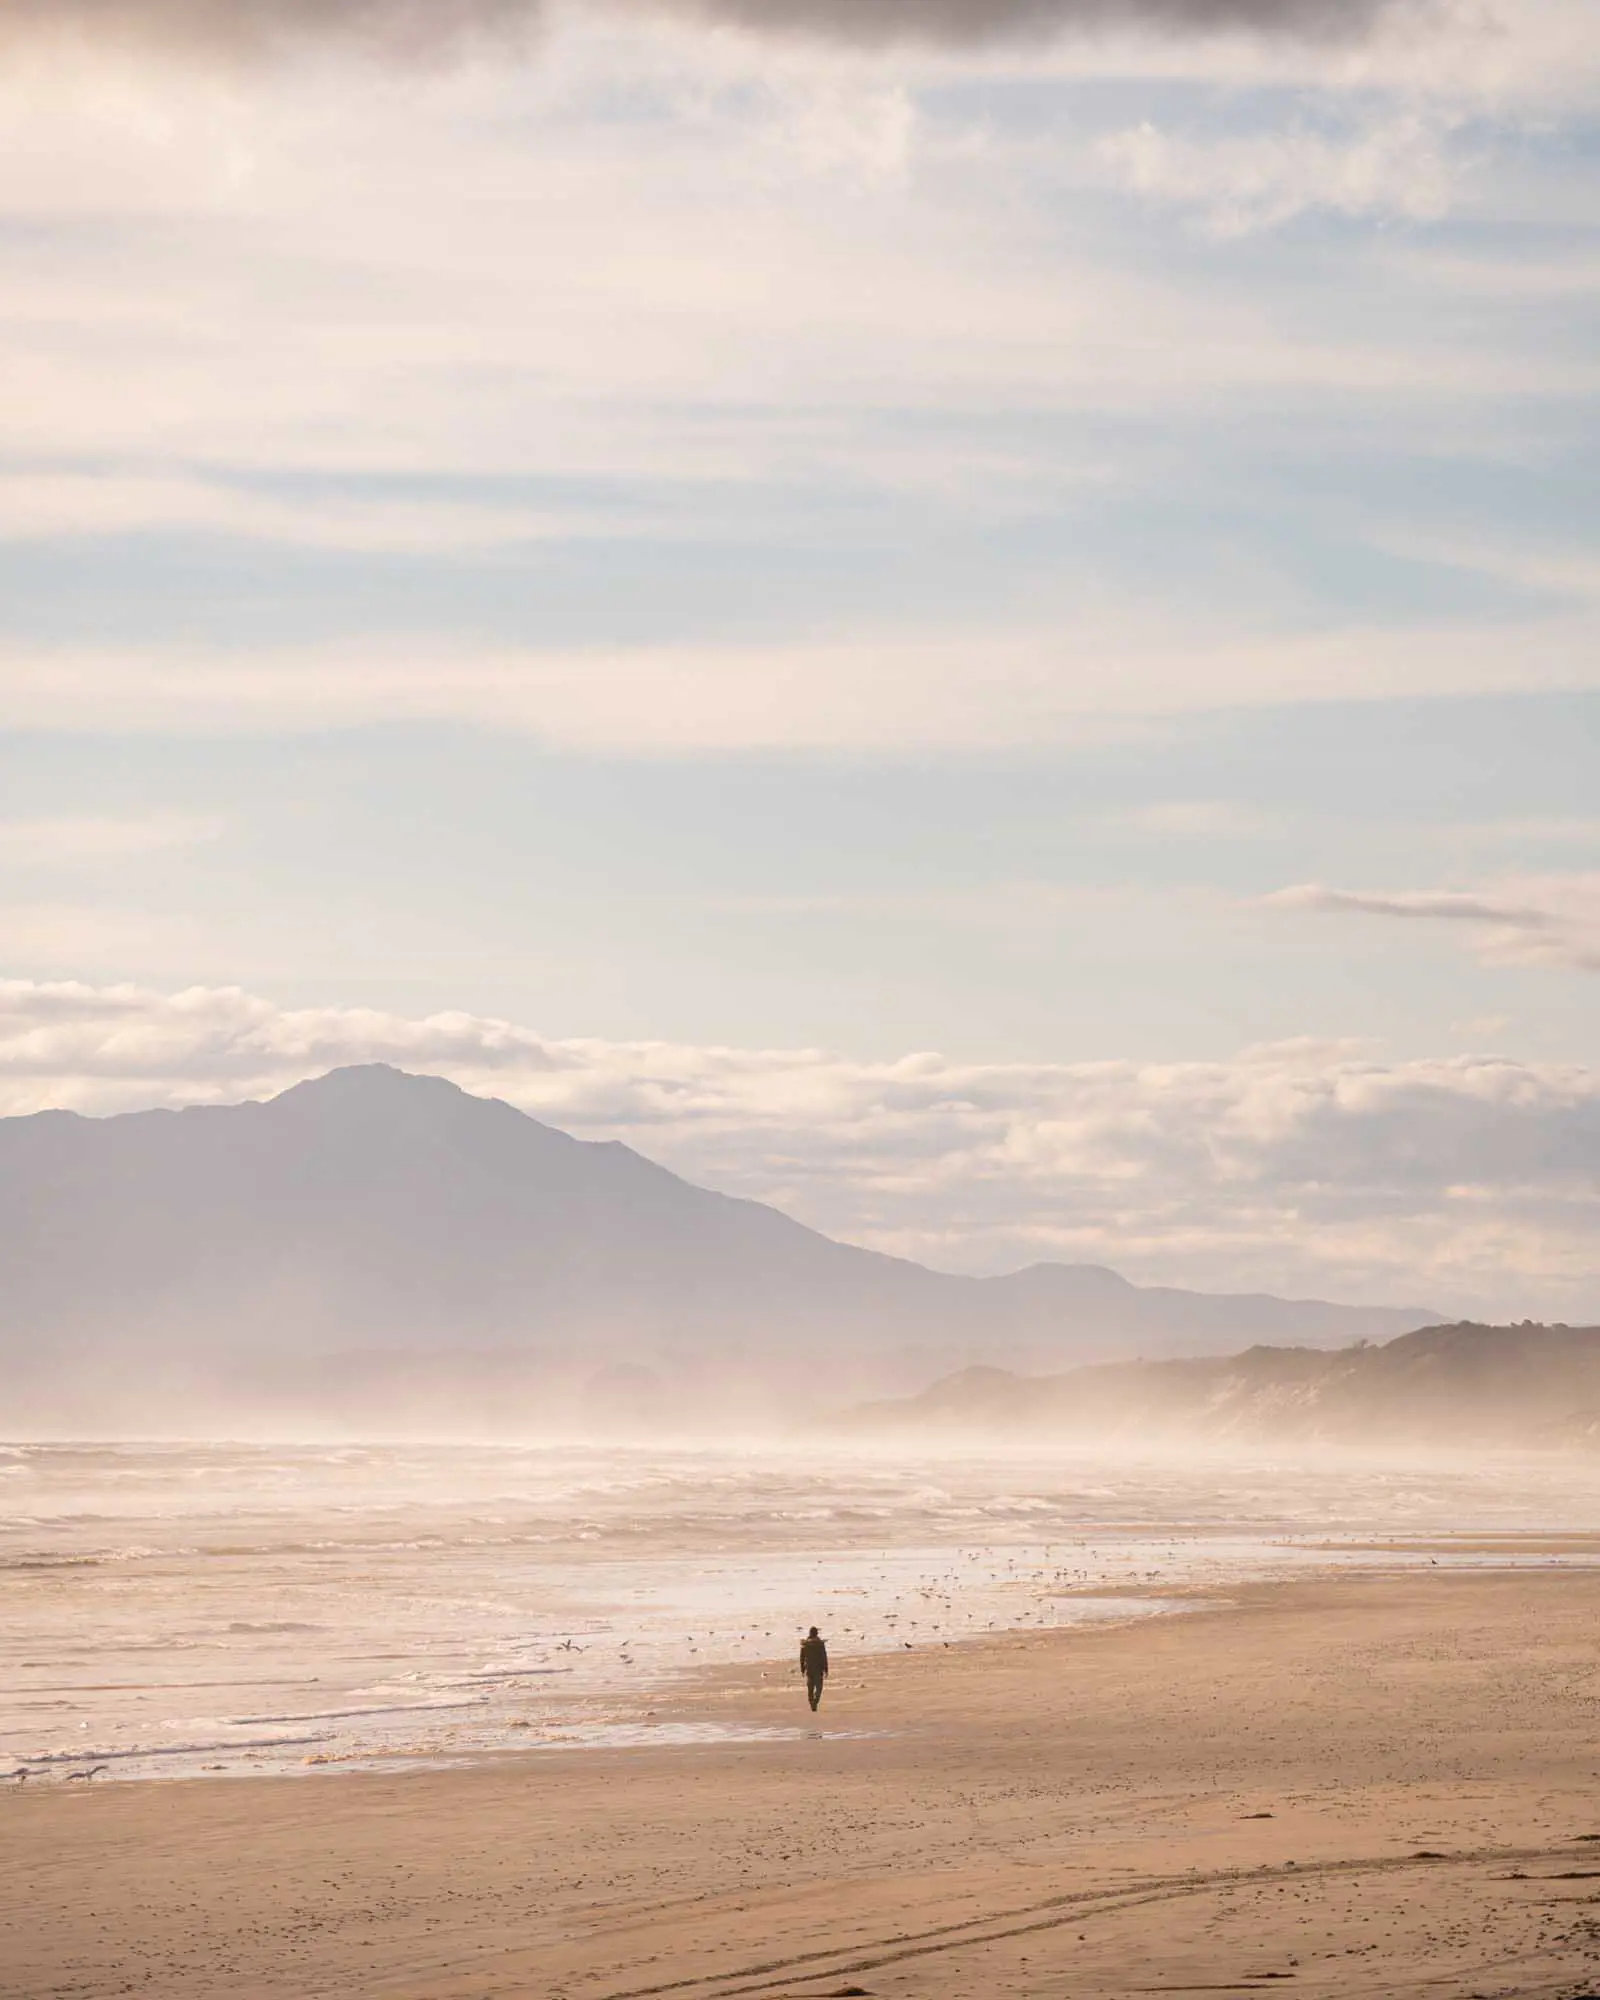 A solitary walker on a wide, sandy beach on a bright sunny day. Clouds and a wind-swept mountain are in the background.